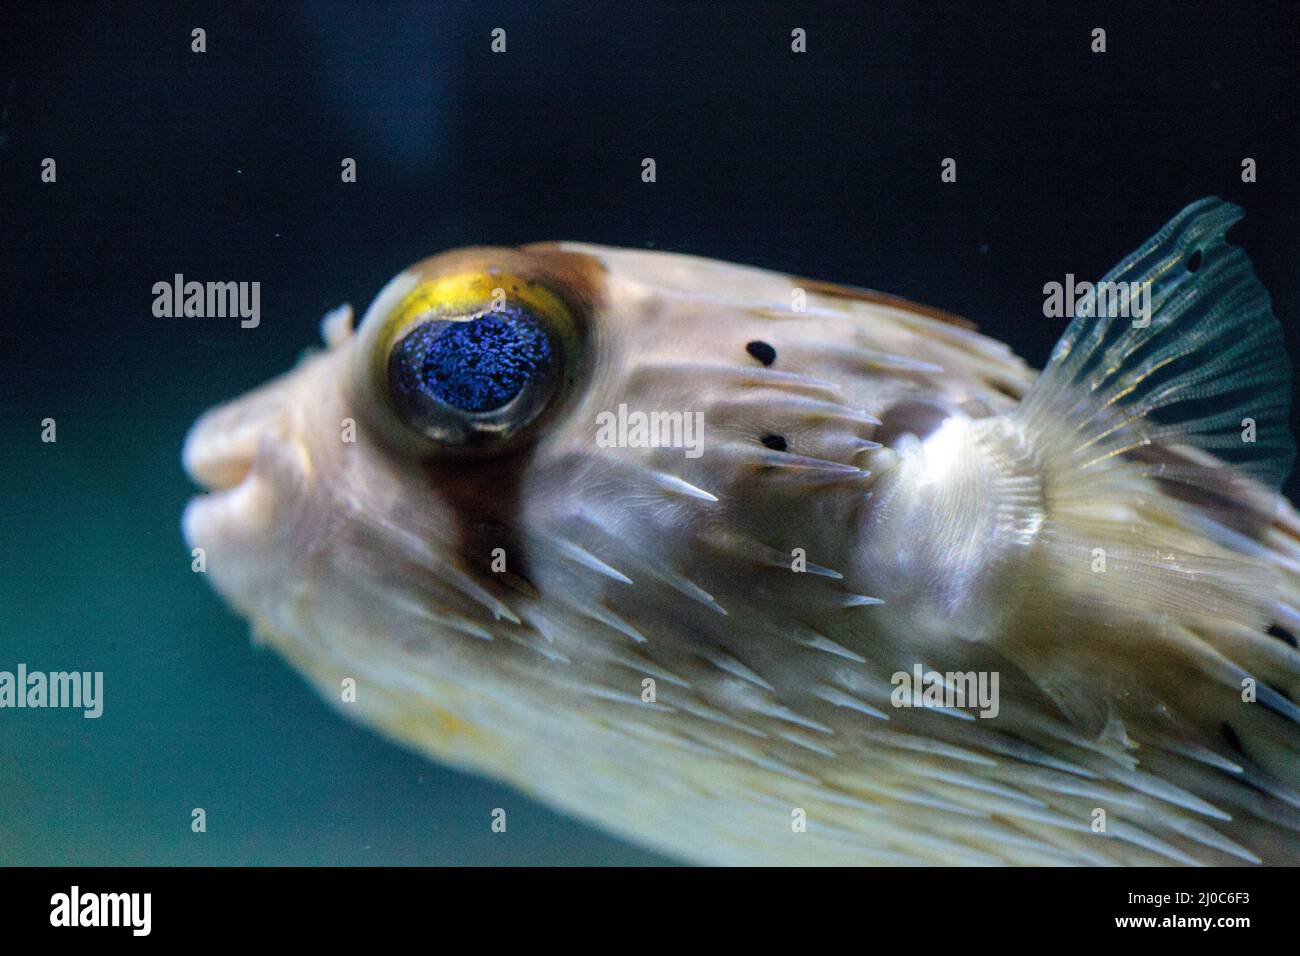 Spiny porcupinefish Diodon holocanthus has eyes that sparkle with blue flecks Stock Photo